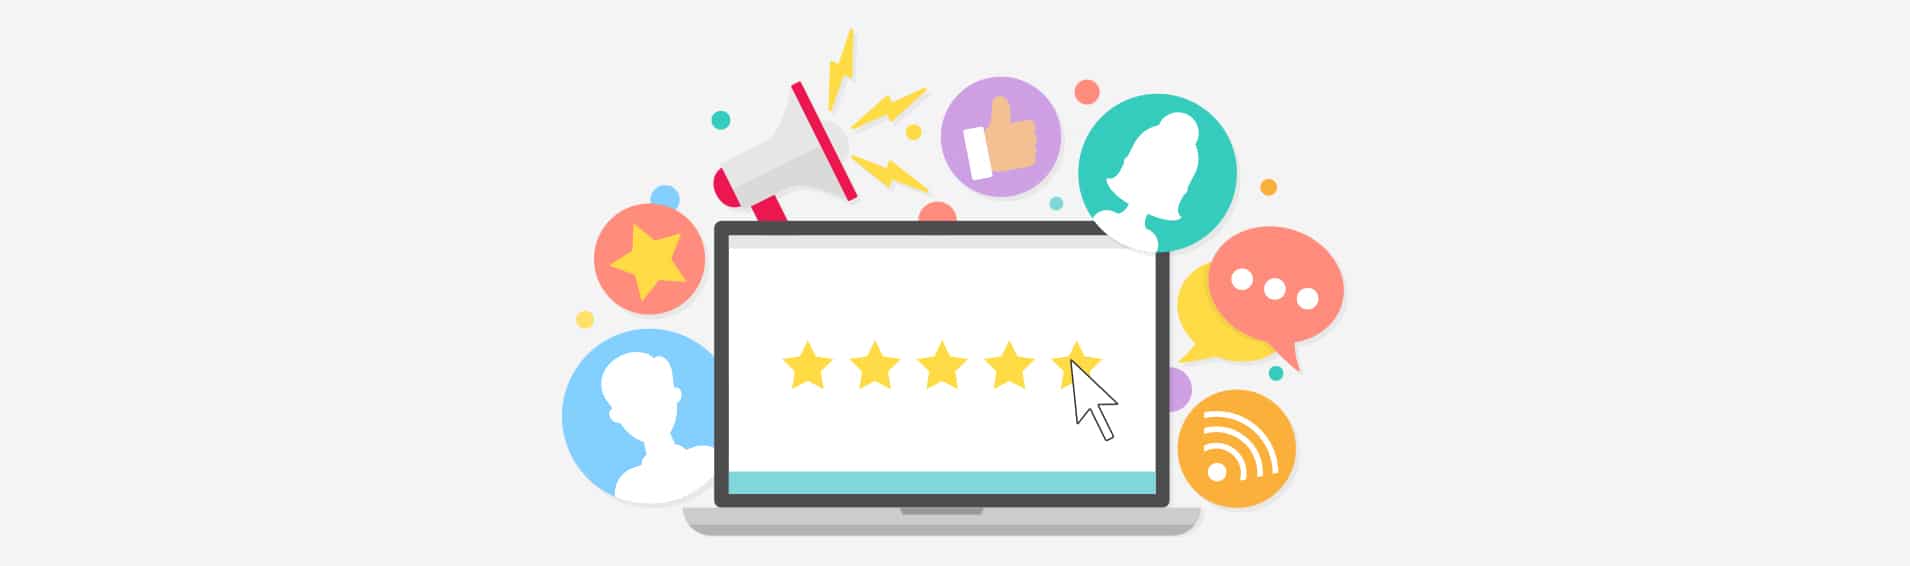 Quantifying Customer Perceptions From Customer Reviews to Enable Strategic Problem Solving